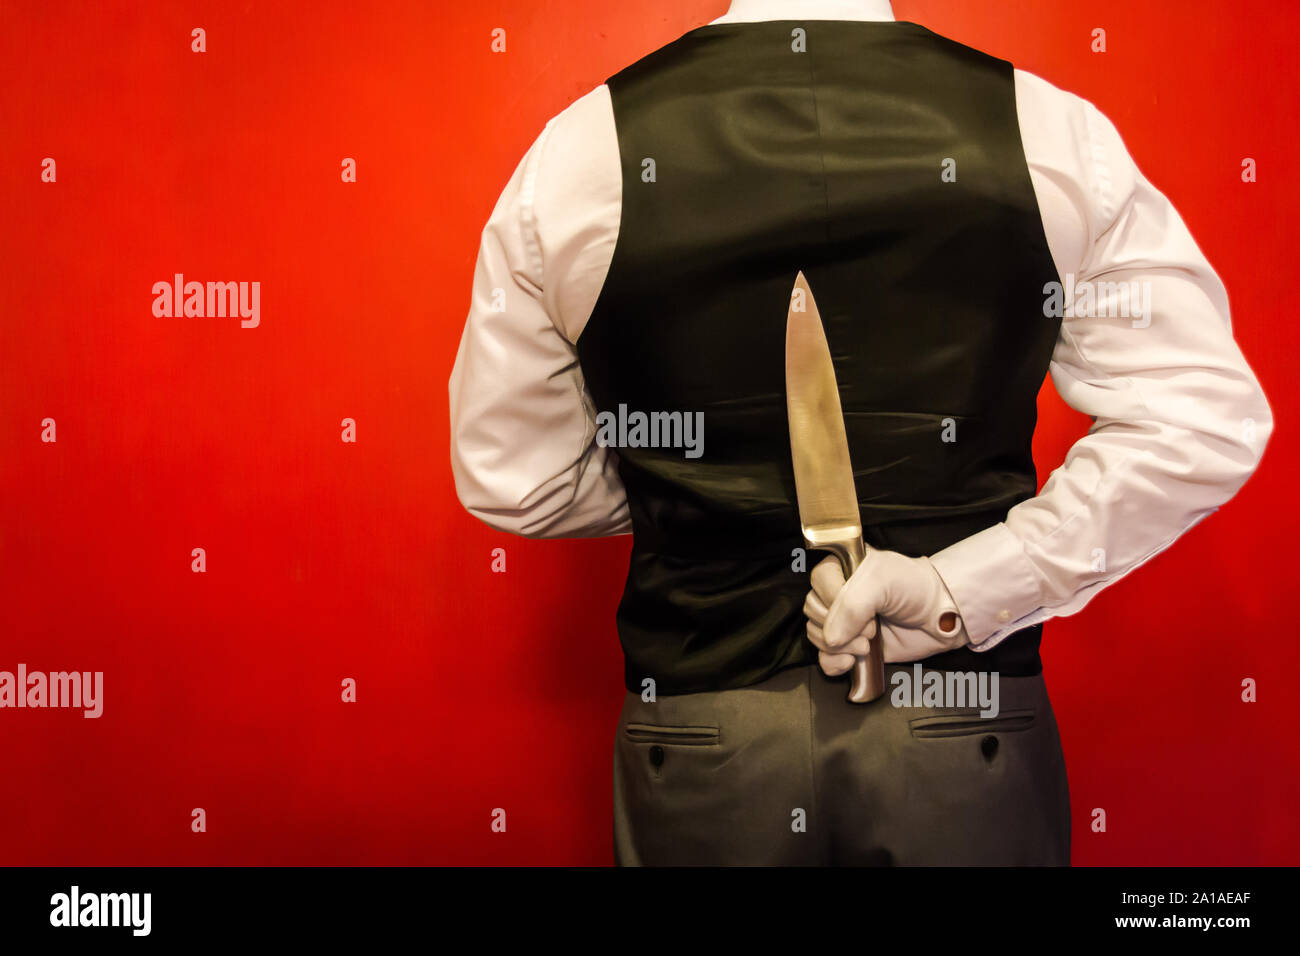 Butler Holding Knife Behind His Back. Concept of Surprise and Danger. Horror Movie Murderer.. Copy Space for Horror Film. Dark Stock Photo. Stock Photo